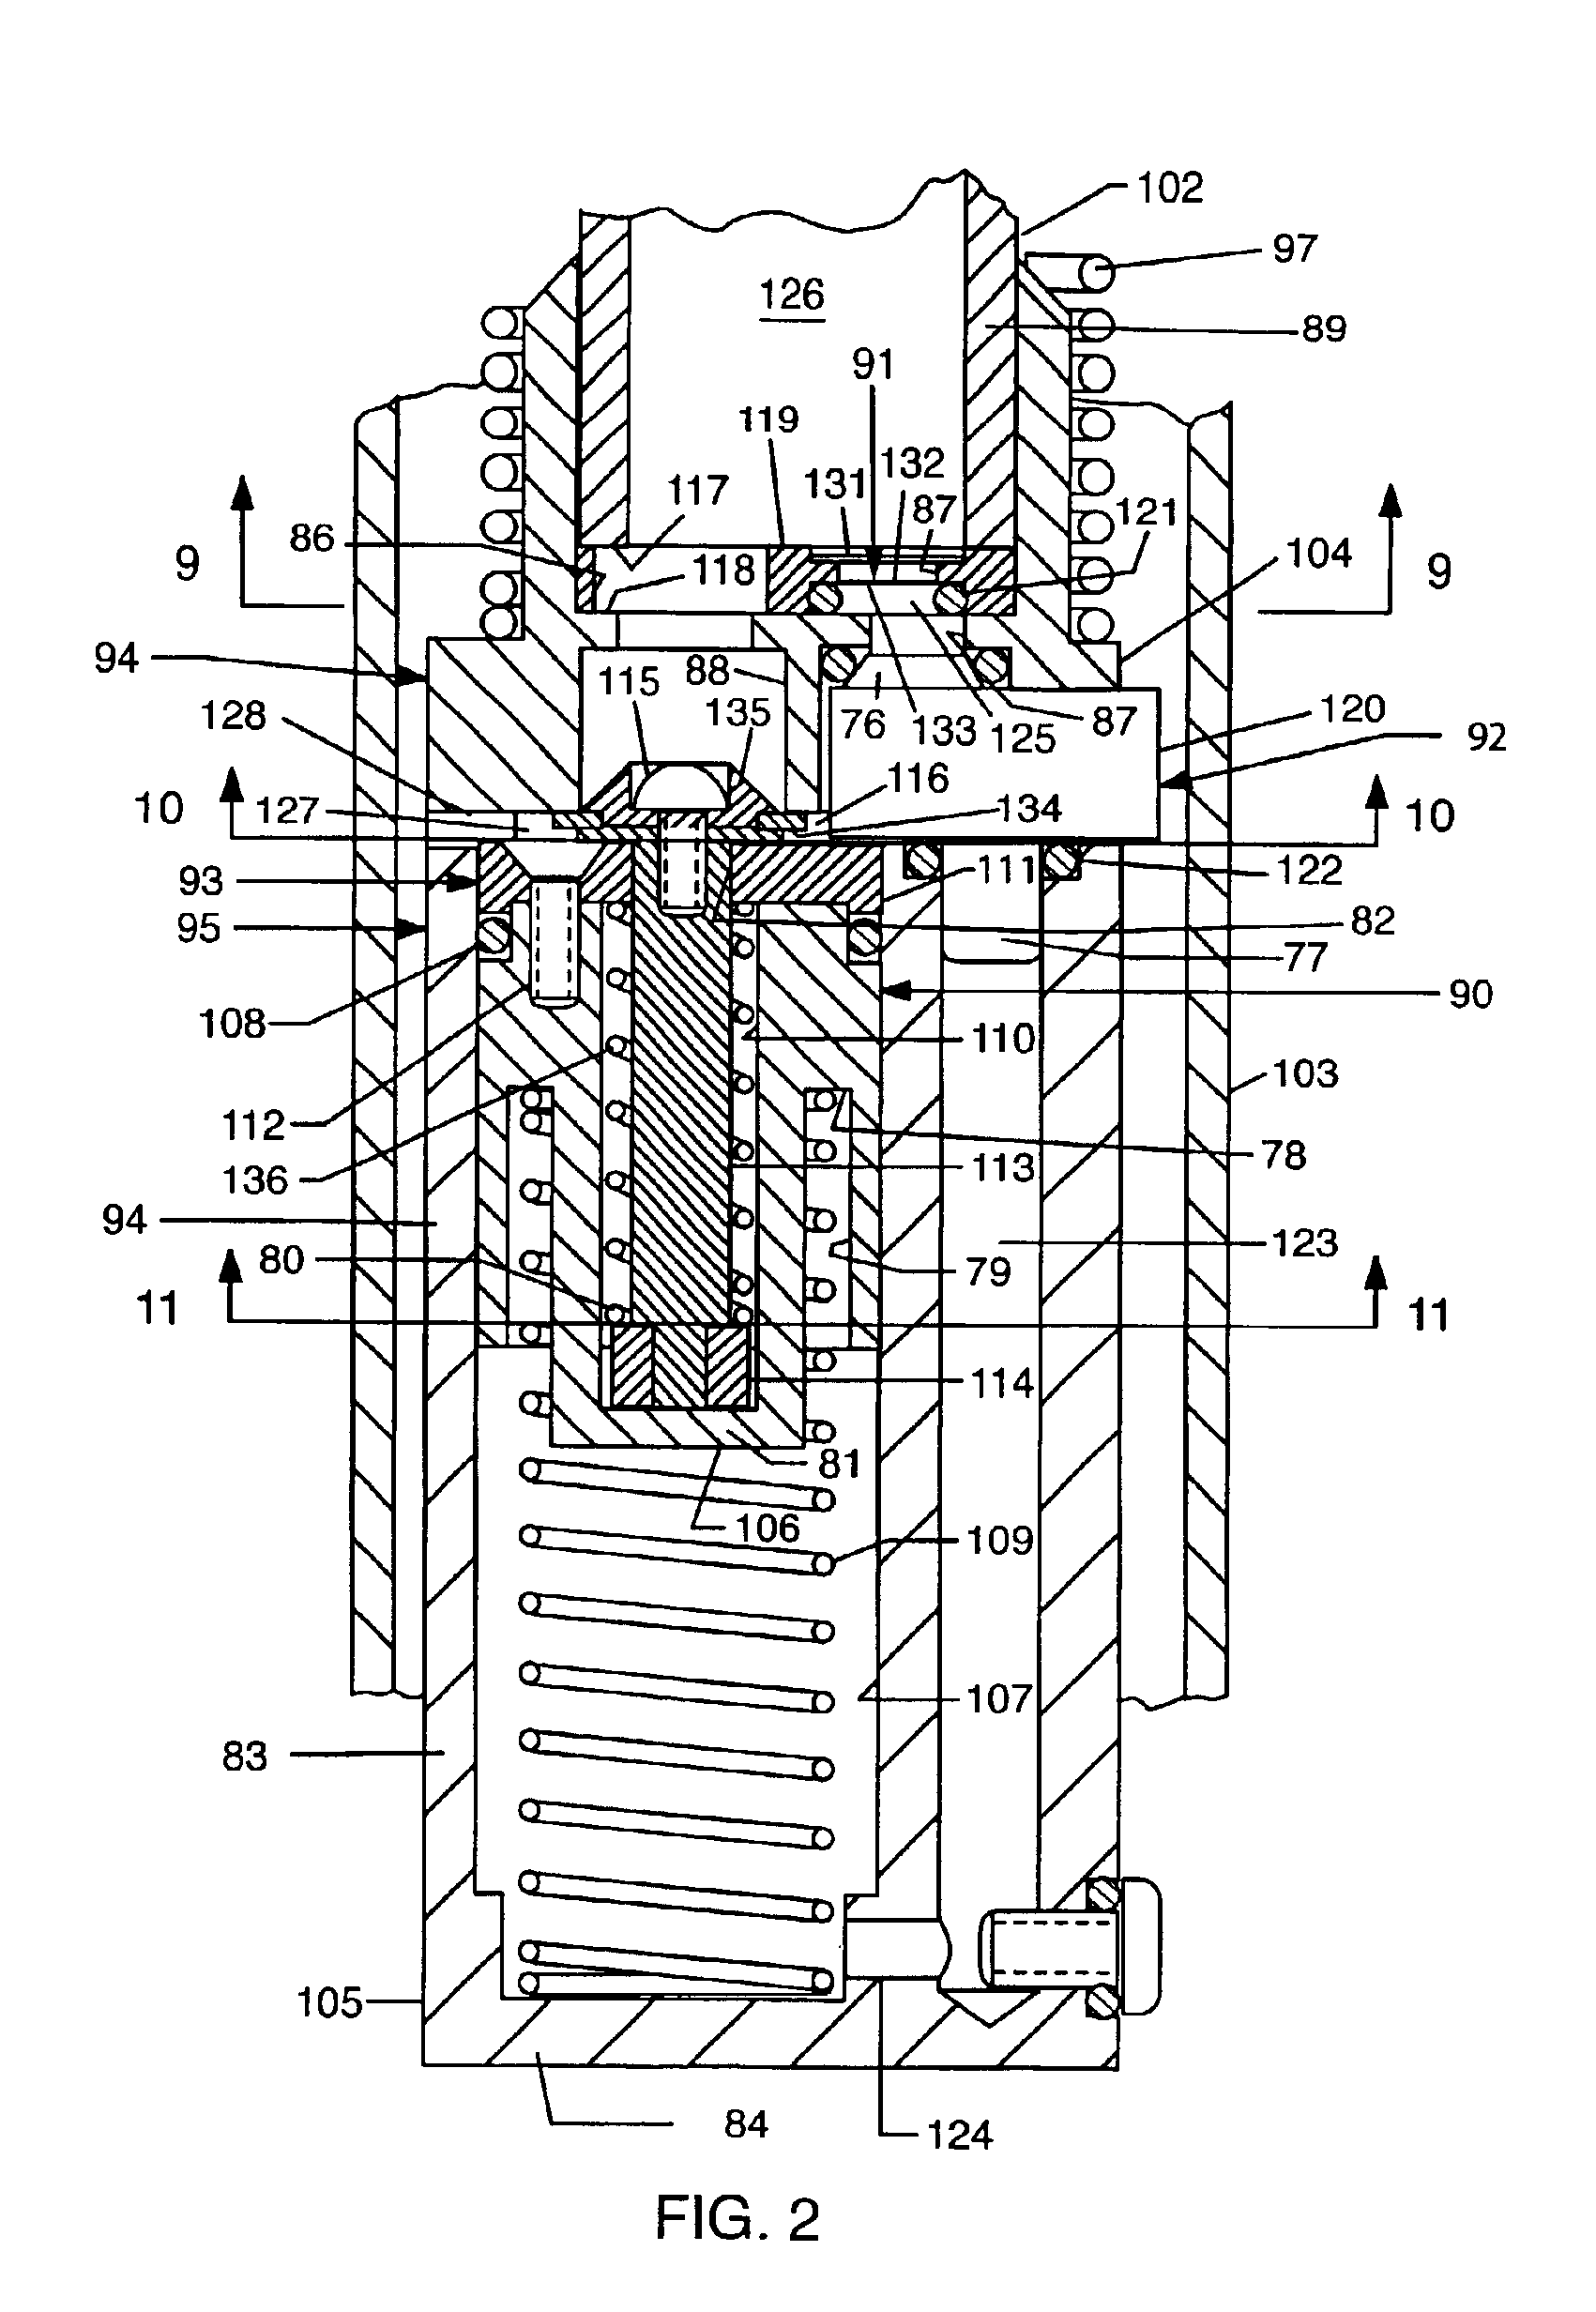 Method and apparatus for reducing the precipitation rate of an irrigation sprinkler